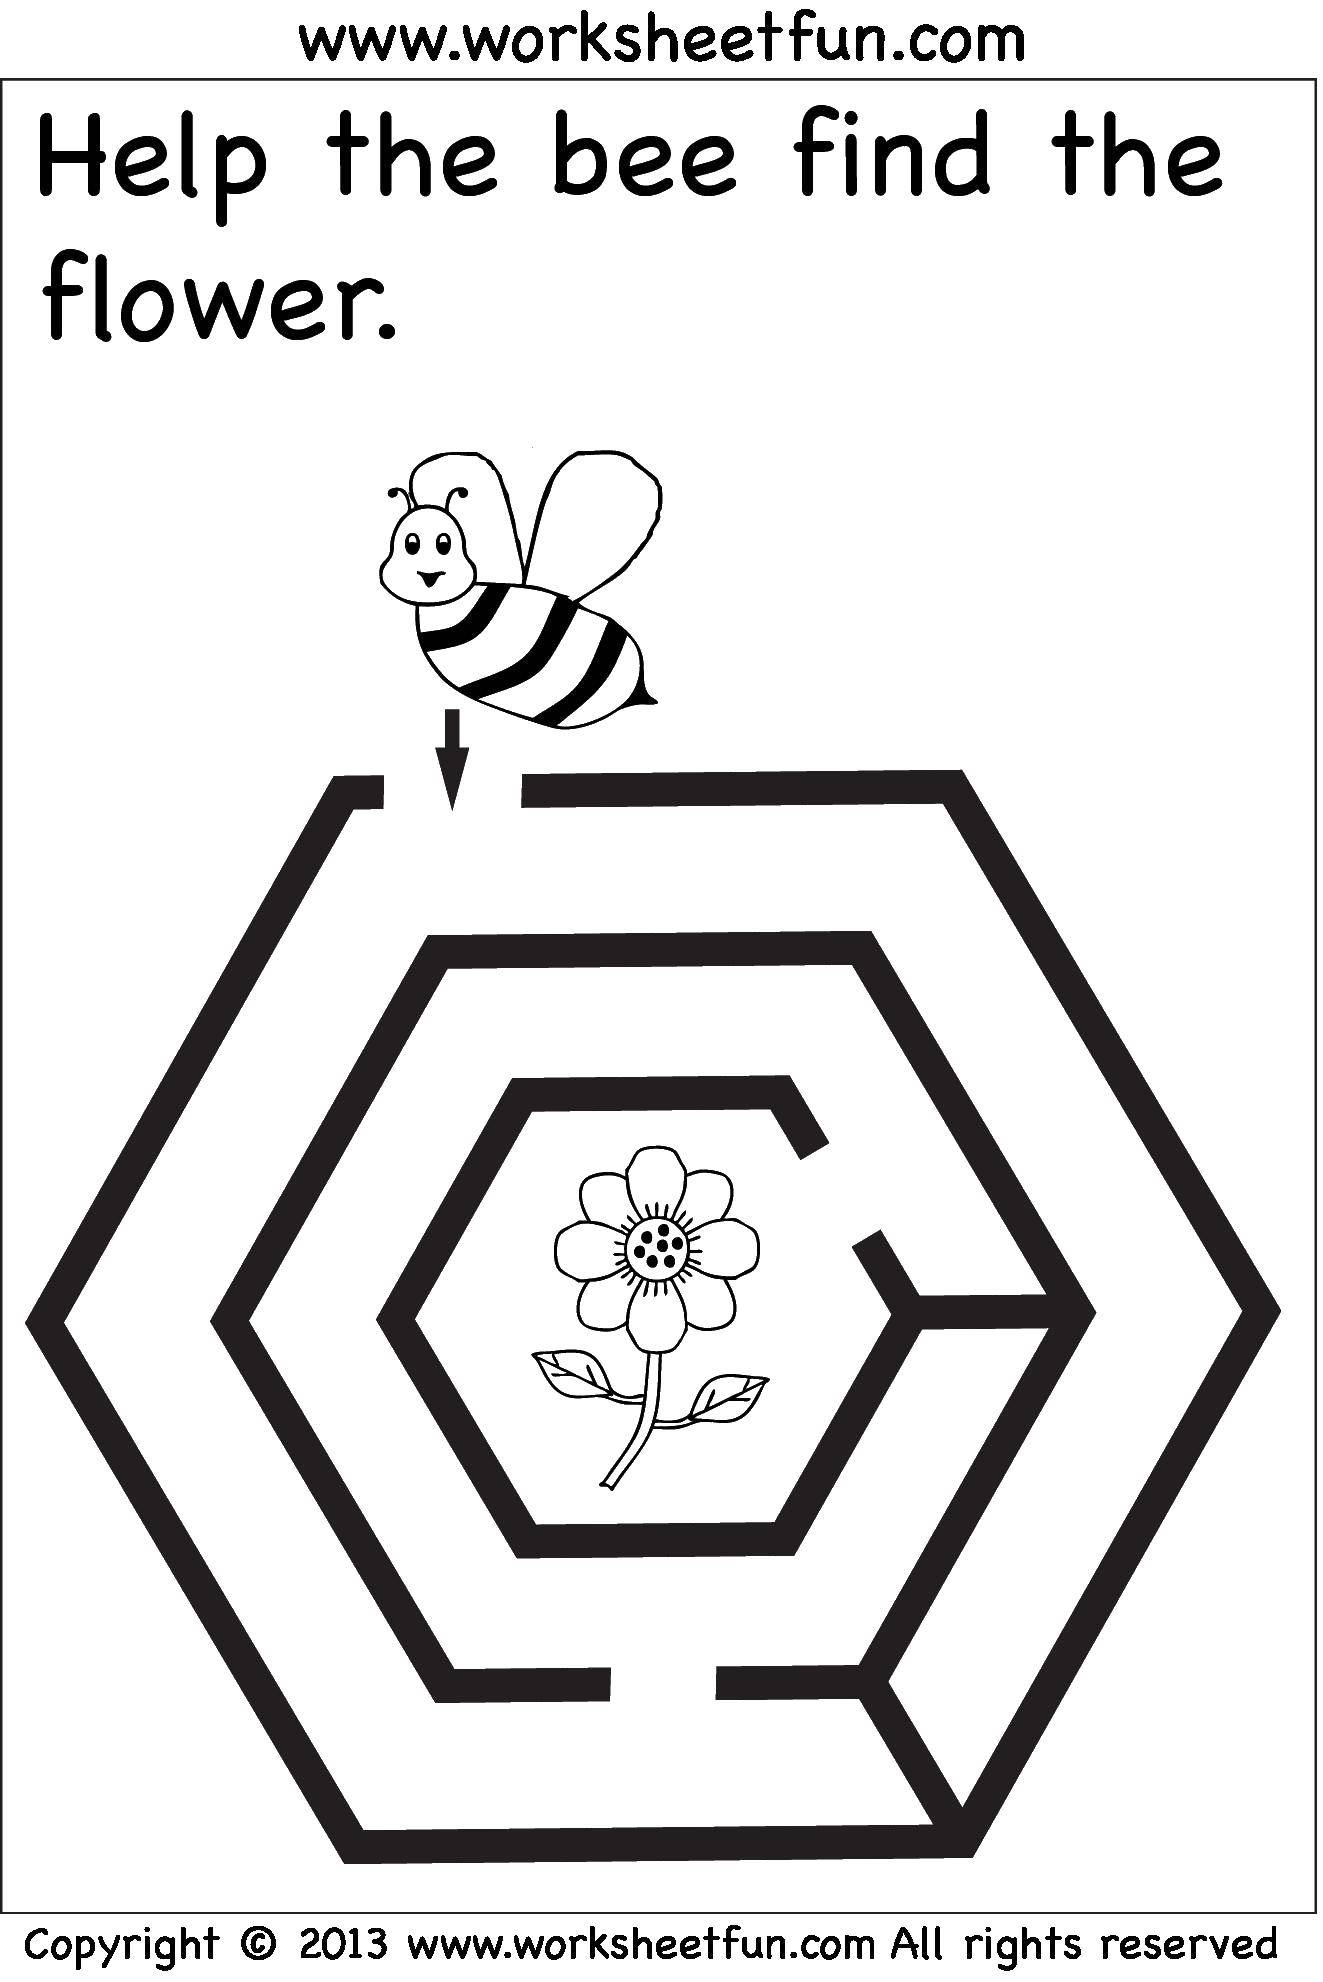 Coloring Help the bee find the flower. Category coloring. Tags:  on thinking, the maze.